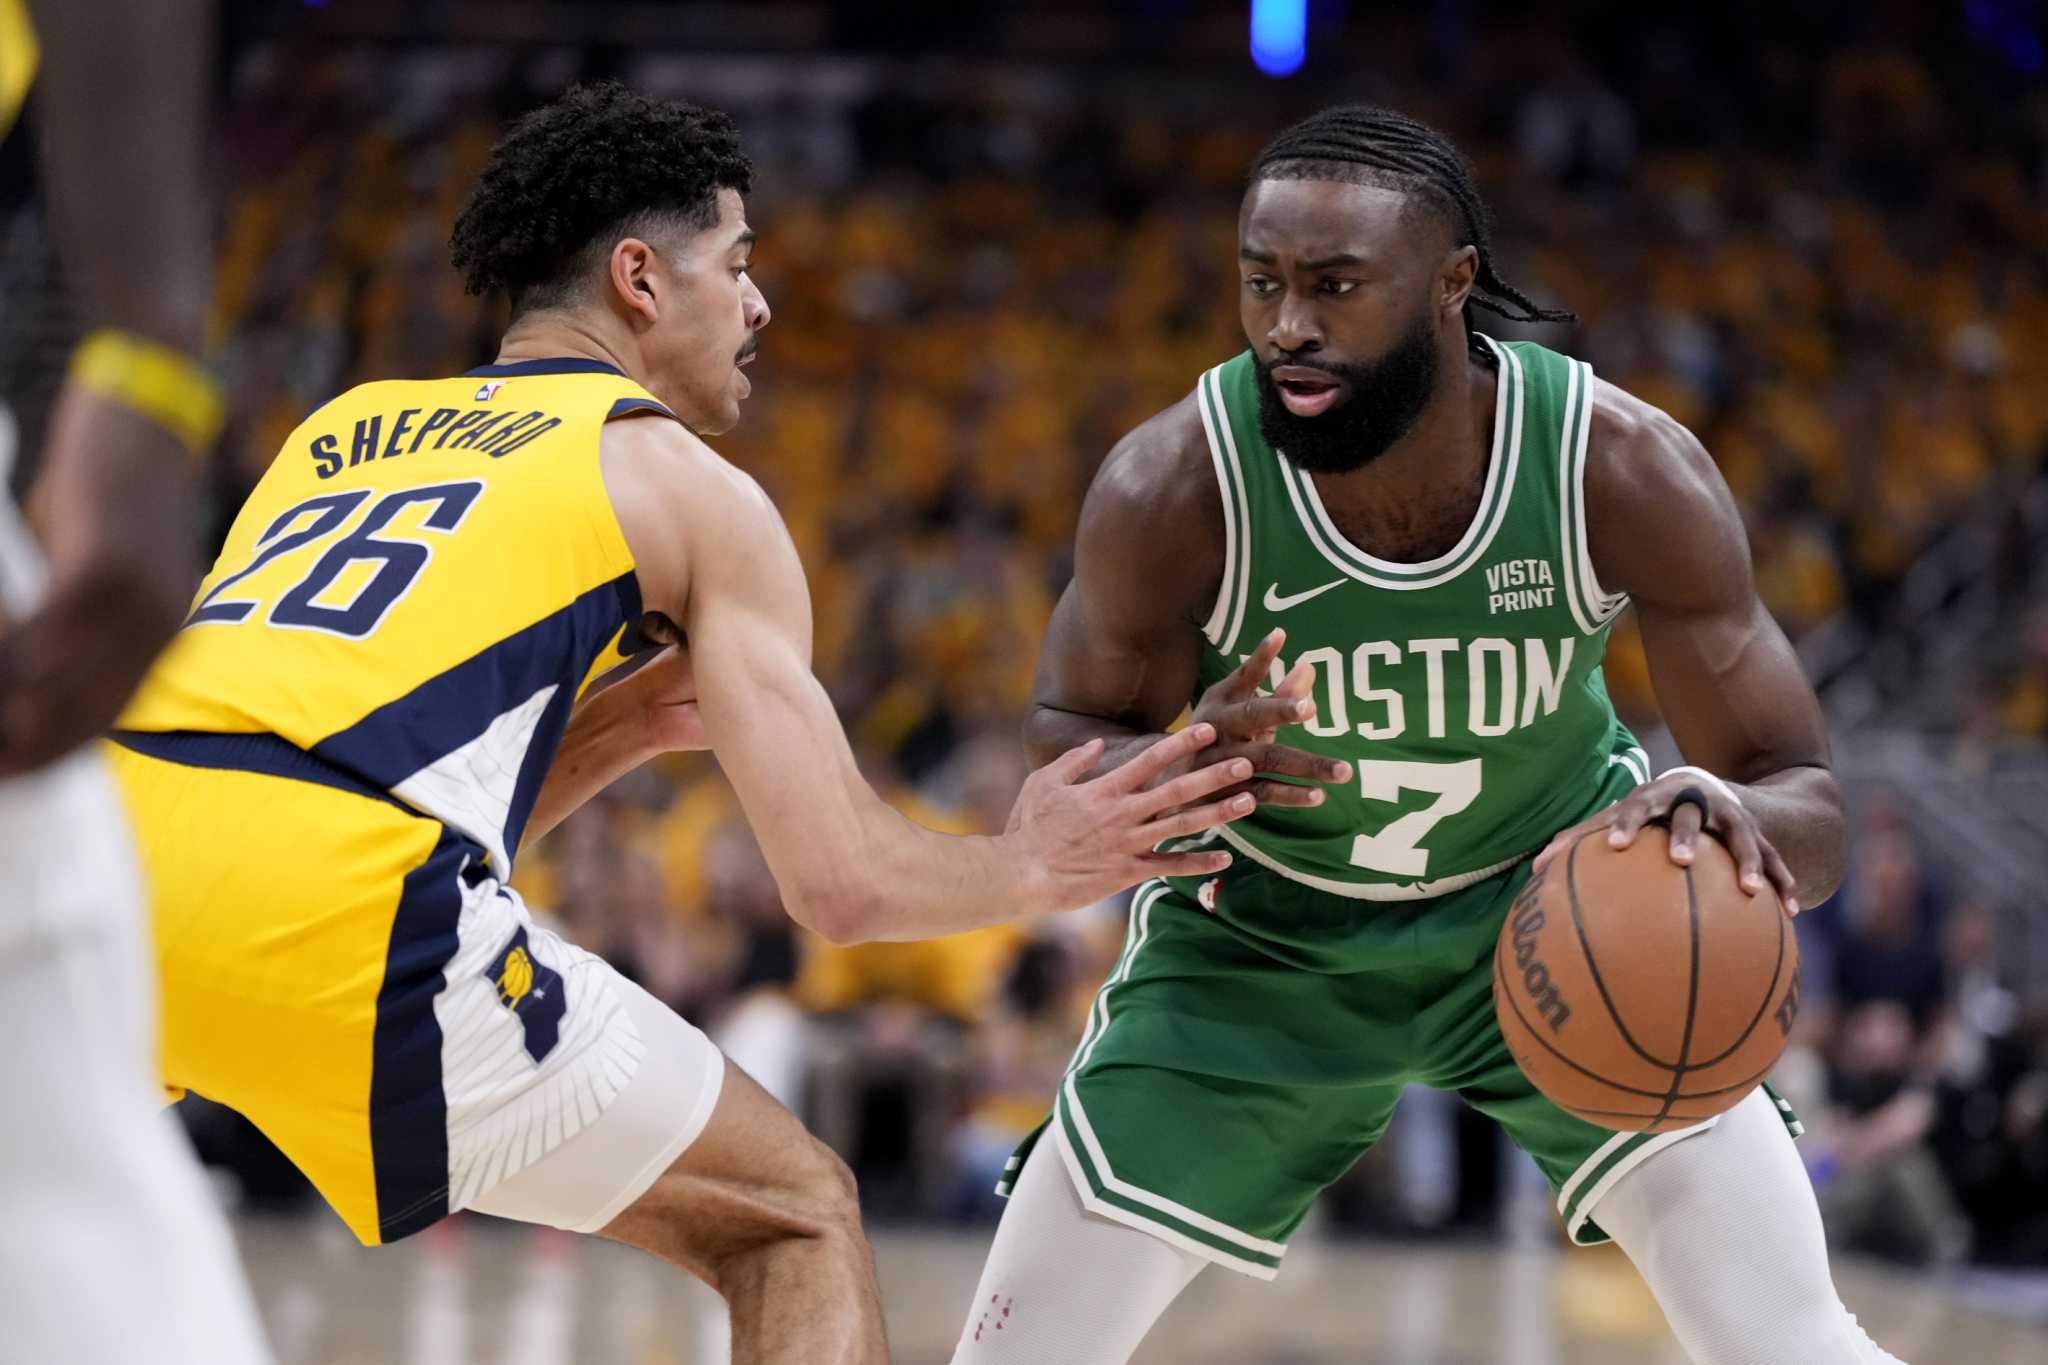 Jrue Holiday's finishing flurry helps Celtics beat Pacers 114-111 for 3-0 lead in East finals